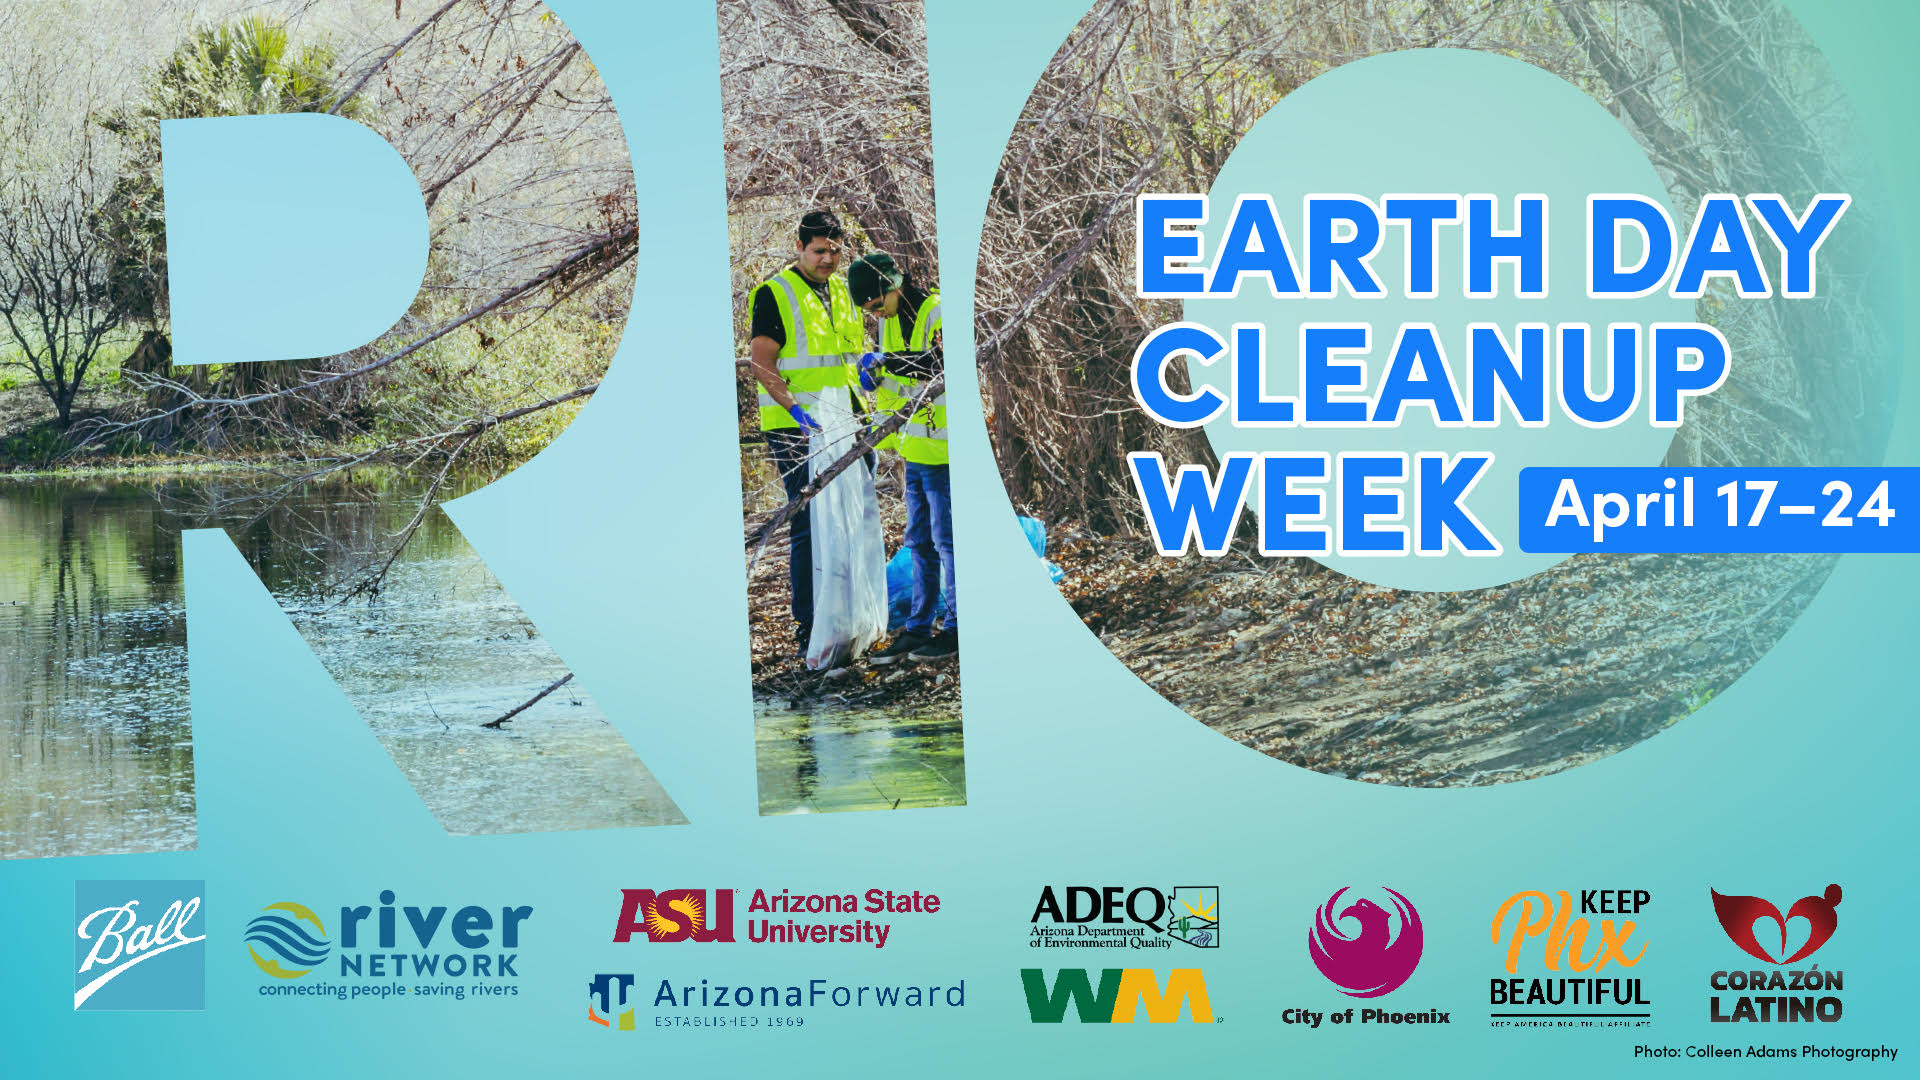 Flyer advertising Rio Earth Day Cleanup Week on April 17 through 24, with a list of sponsor logos